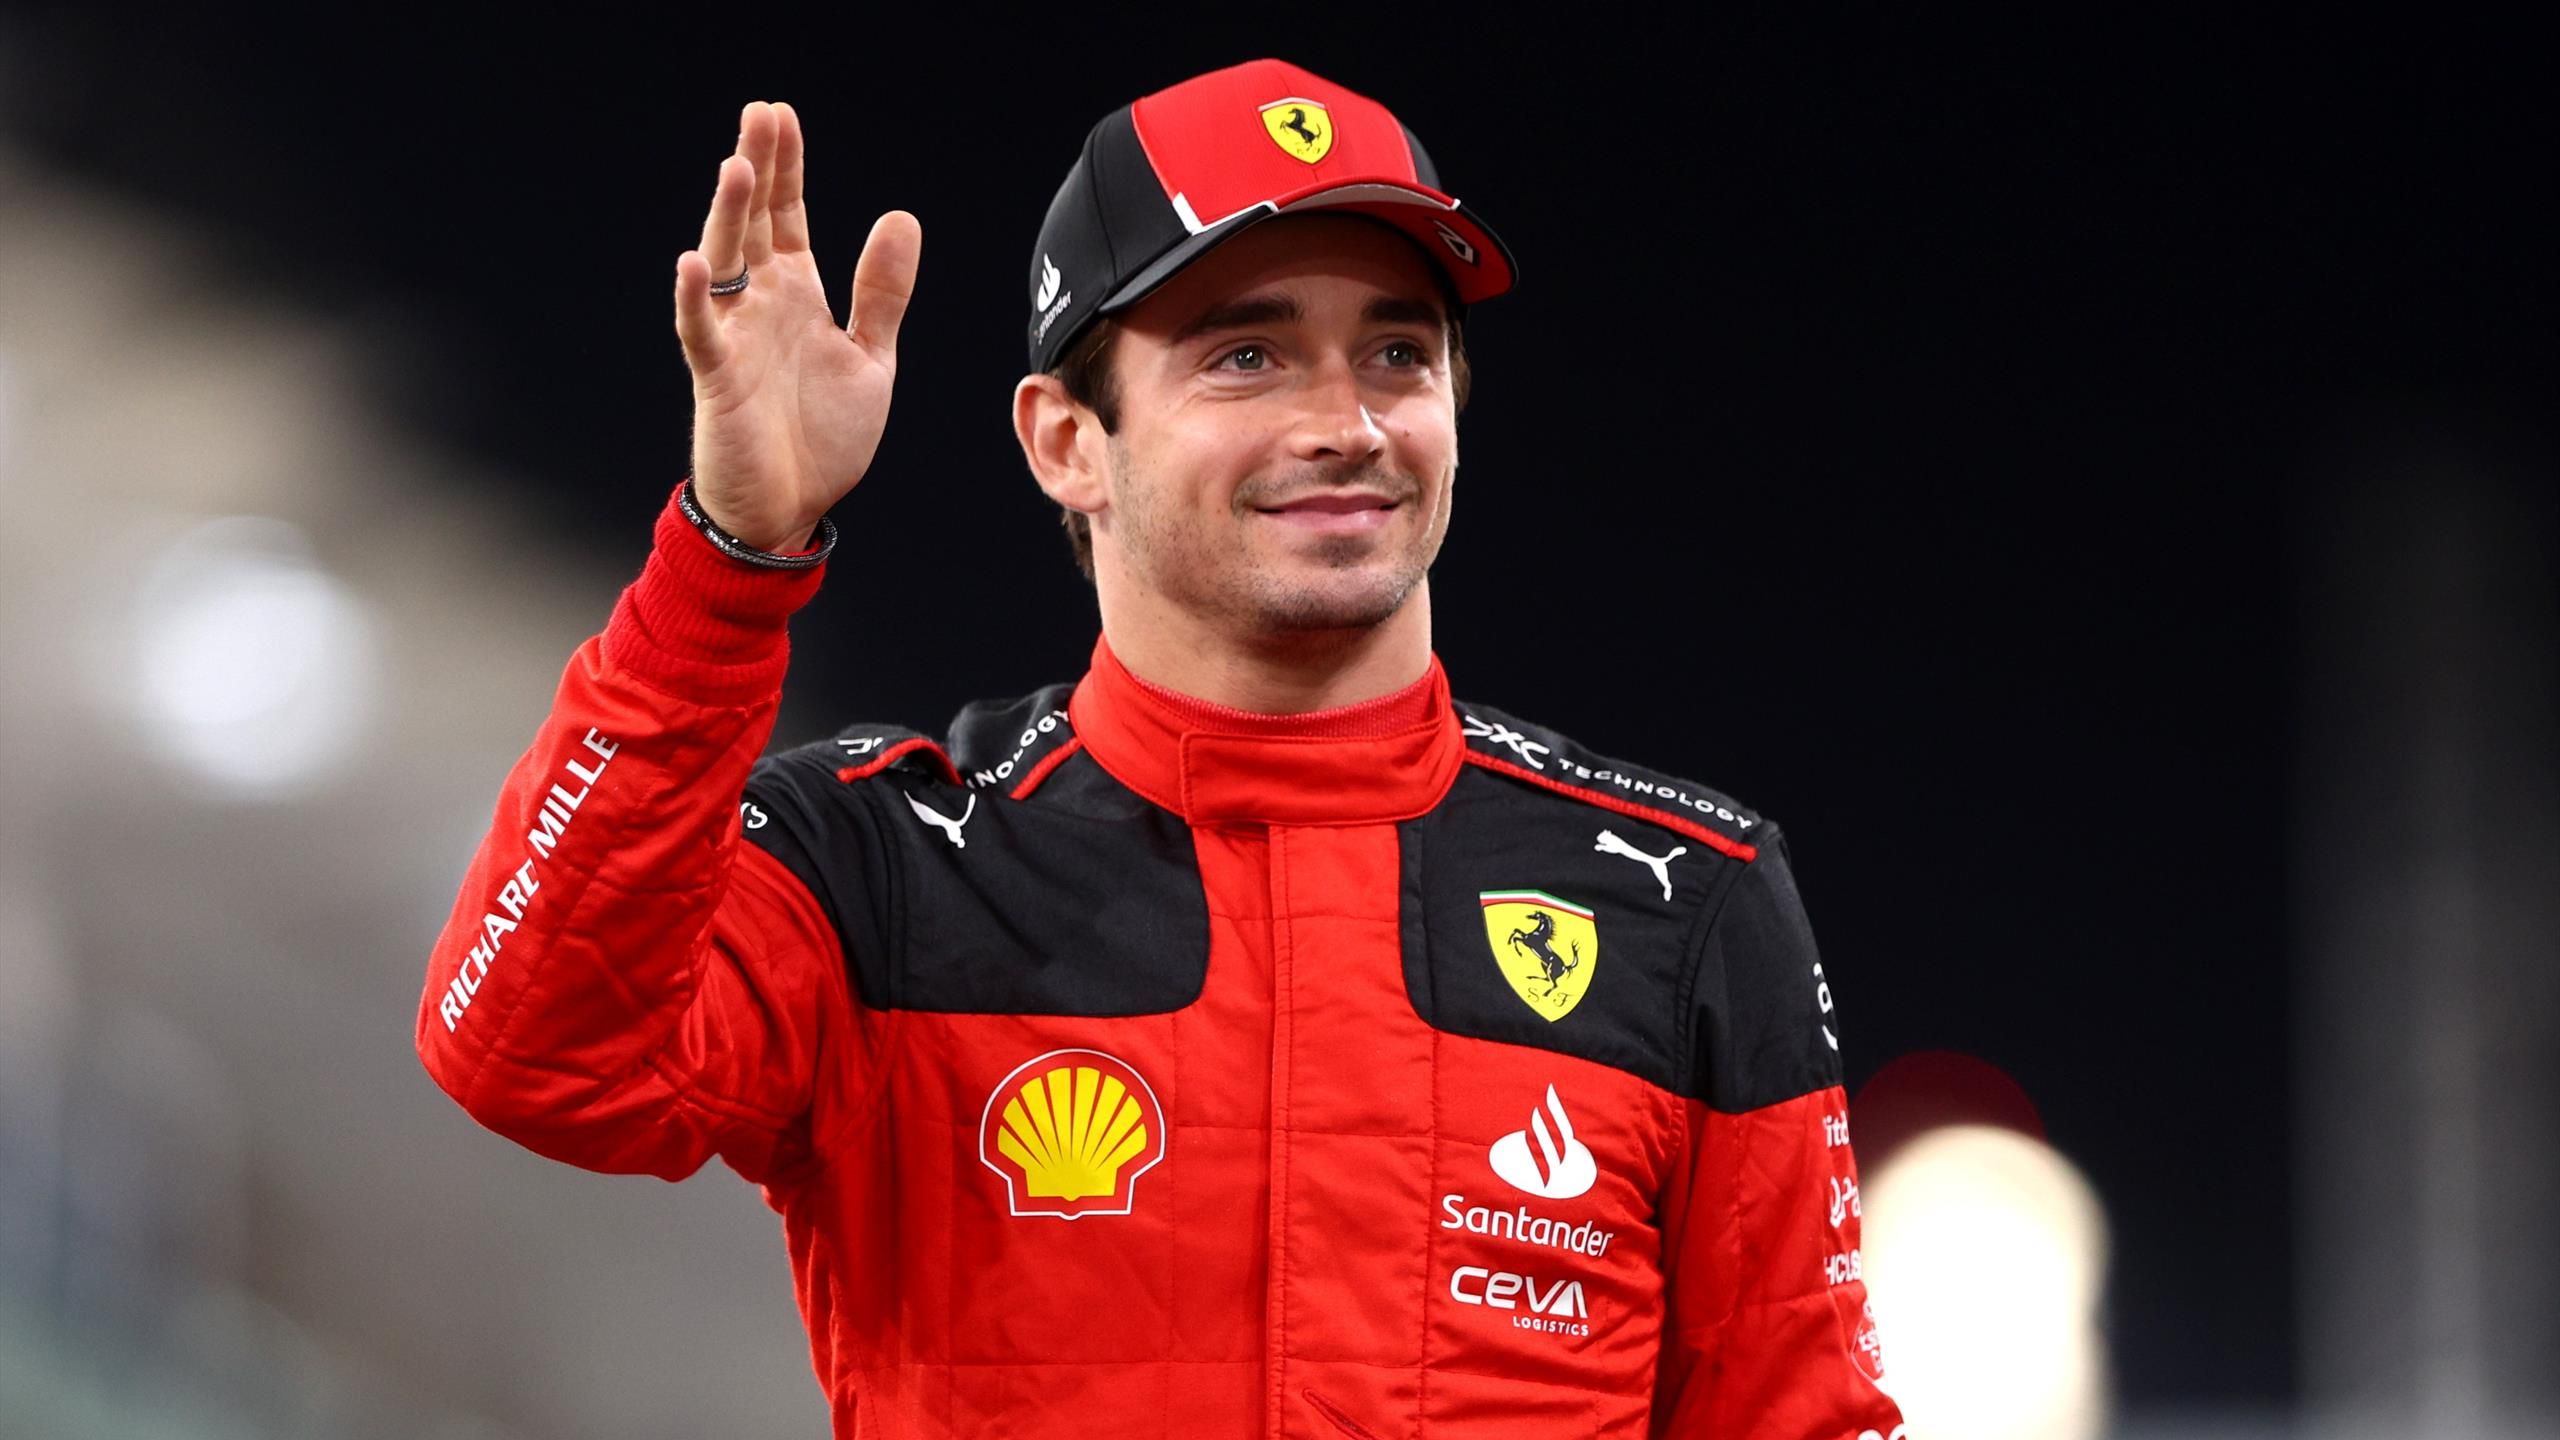 Charles Leclerc explains reason for signing long-term Ferrari contract,  claims they have 'the best chance of having the best car